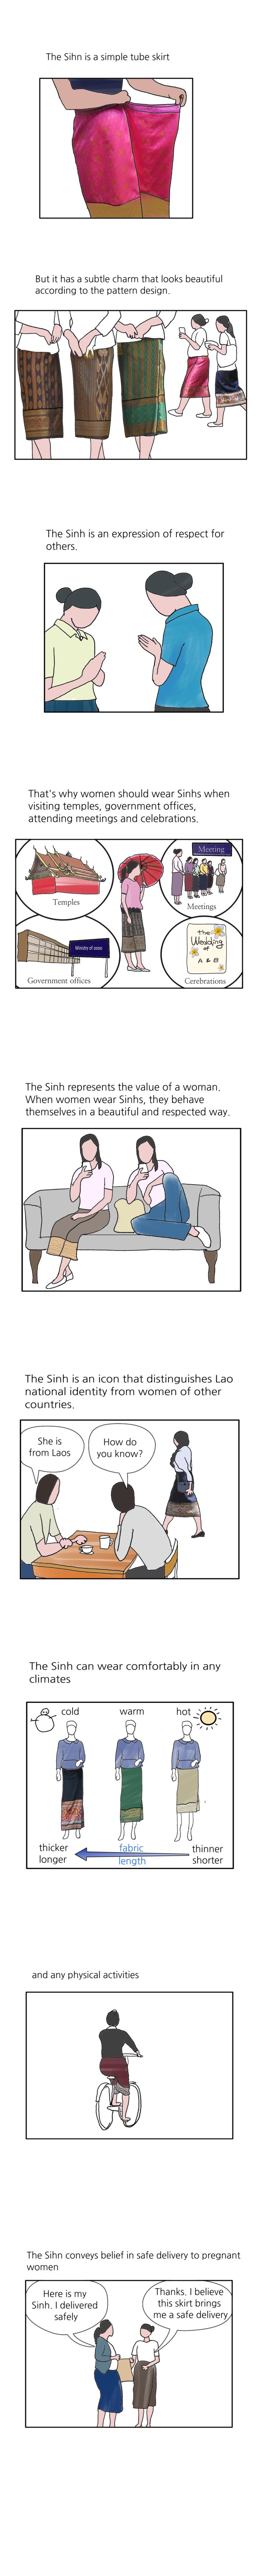 skyko comics about lao skirt called lao sinh-Do laos women really love to wear sinh?-page7 